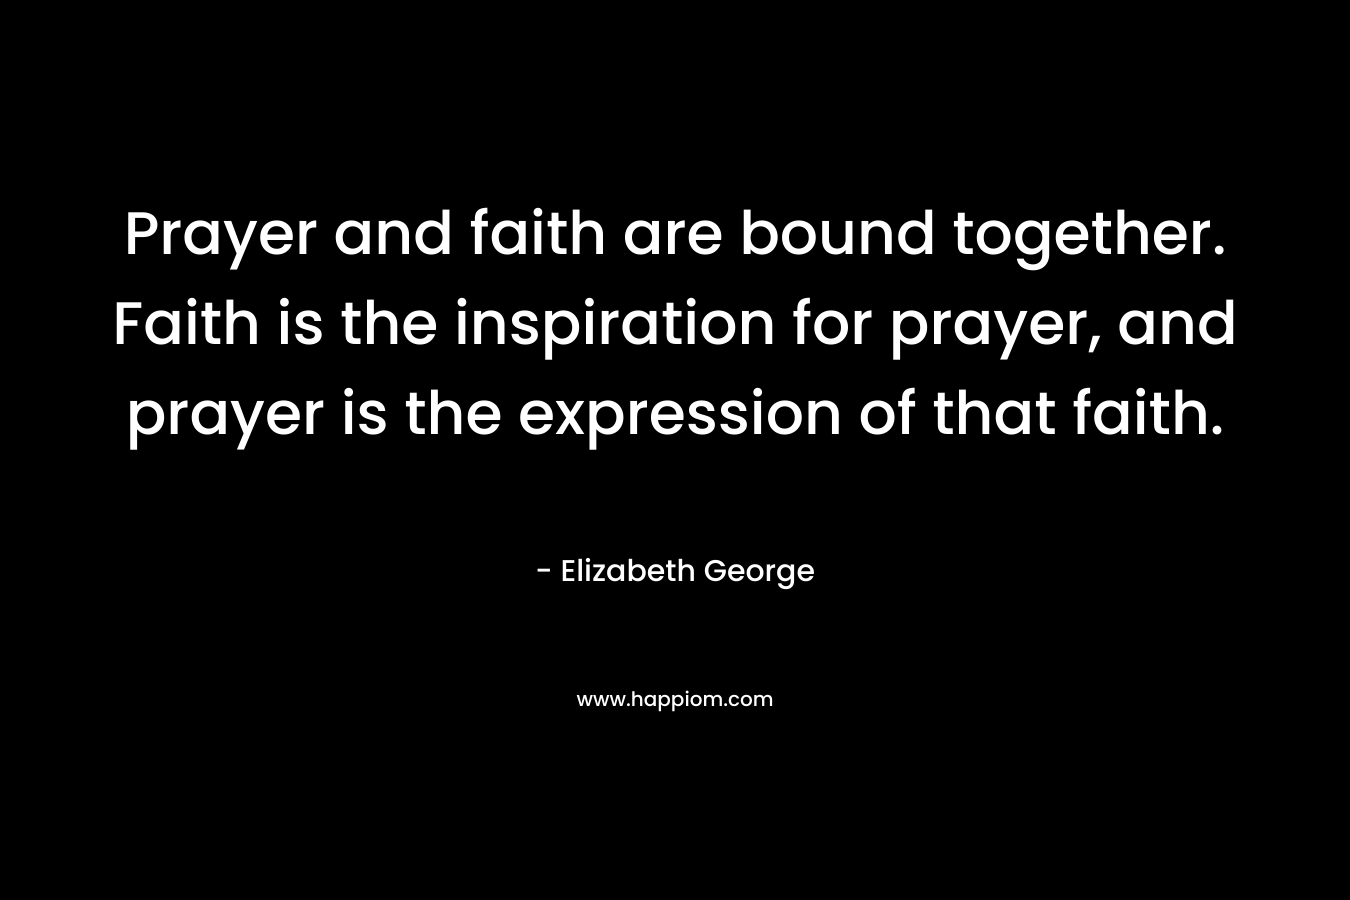 Prayer and faith are bound together. Faith is the inspiration for prayer, and prayer is the expression of that faith.